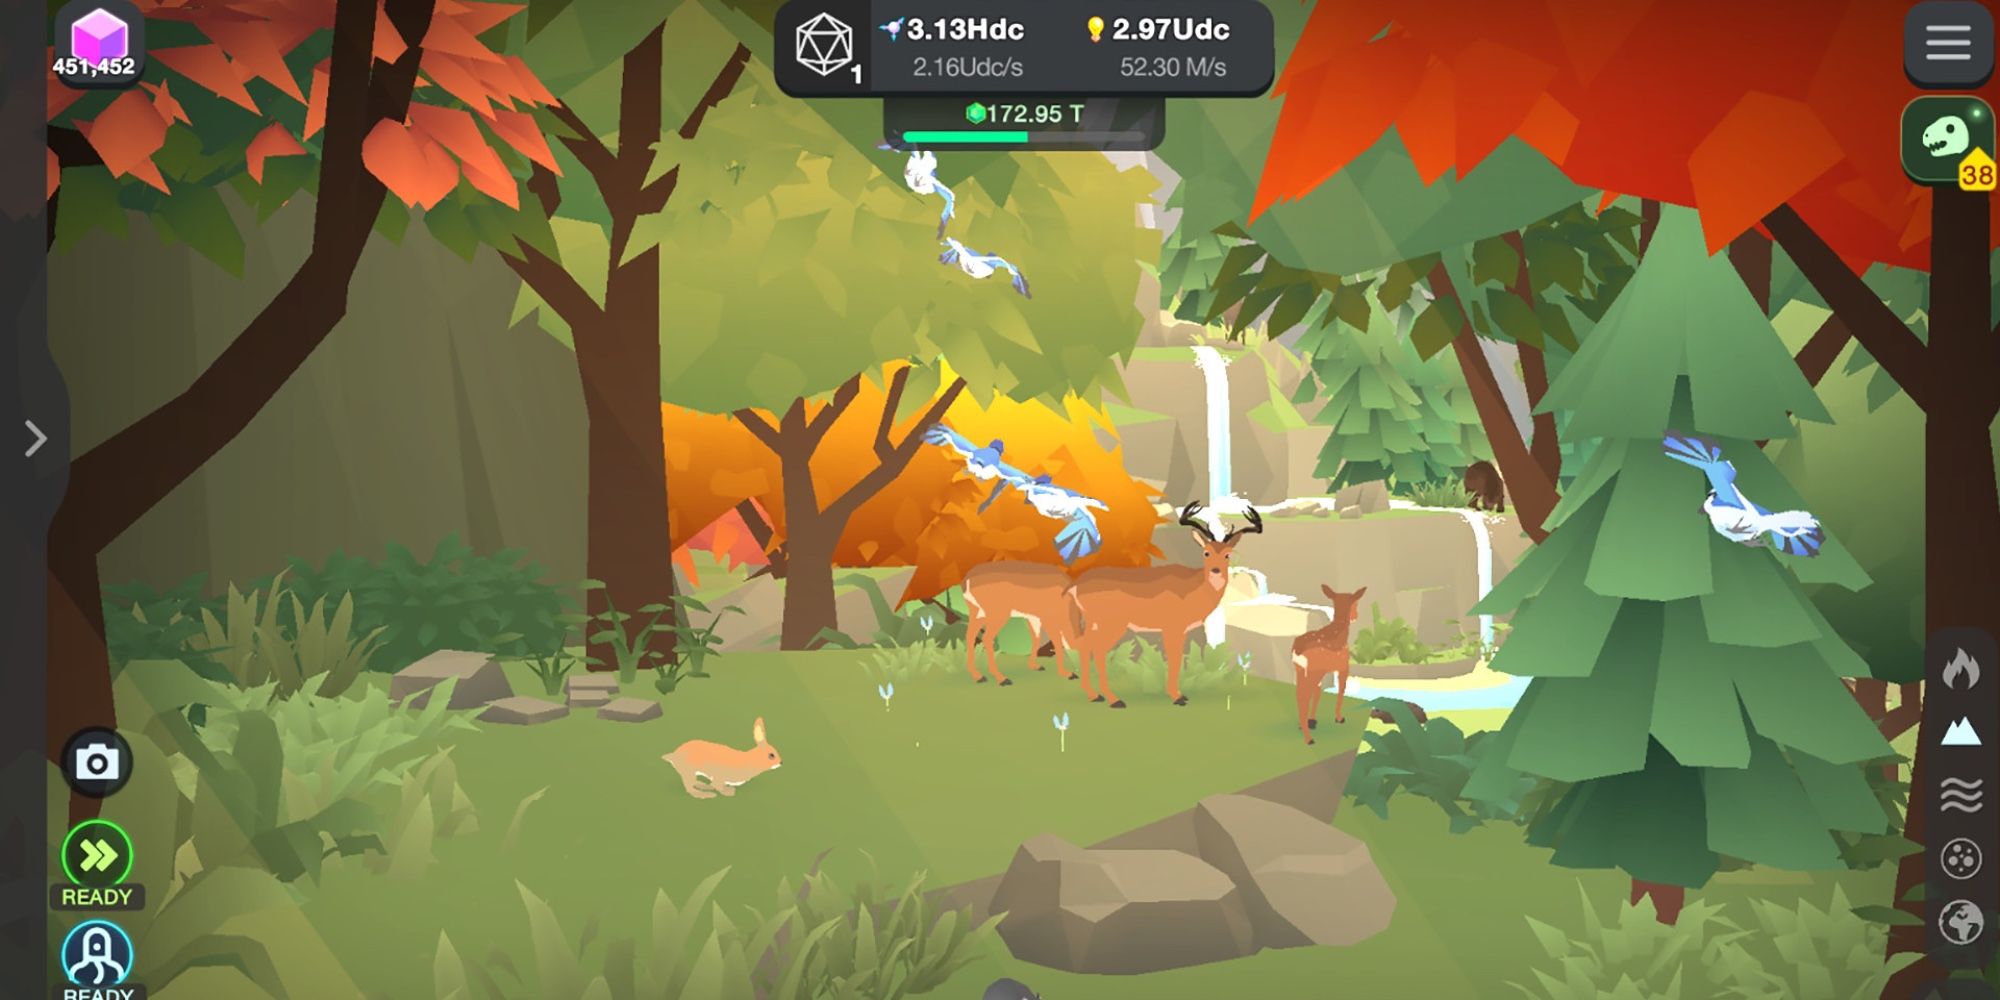 Free-to-play Games - Cell to Singularity - Player witnesses Deer in the wild